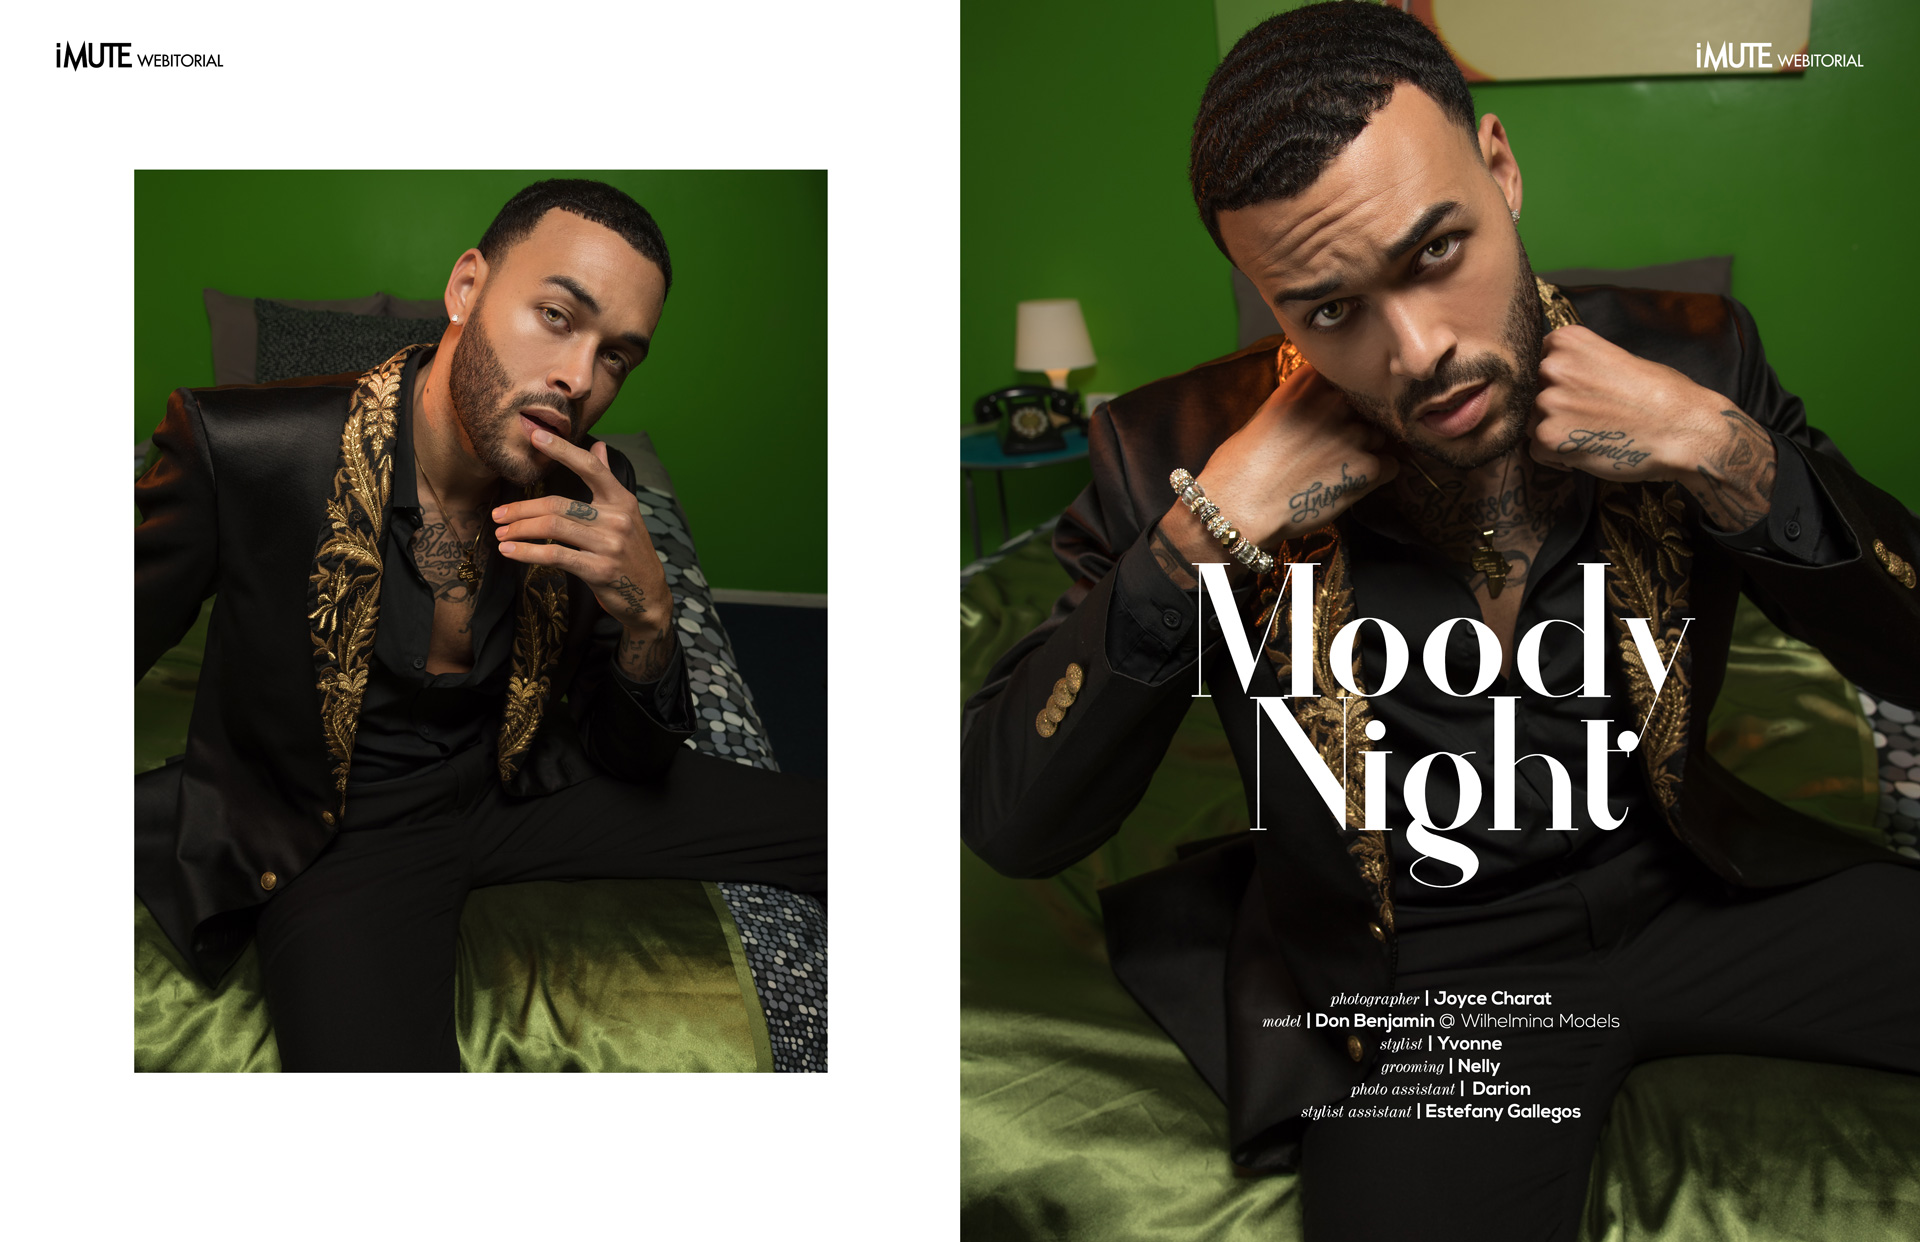 Moody Night webitorial for iMute Magazine Photographer | Joyce Charat Model | Don Benjamin @ Wilhelmina Models Stylist | Yvonne Grooming | Nelly Photo Assistant | Darion Stylist Assistant | Estefany Gallegos